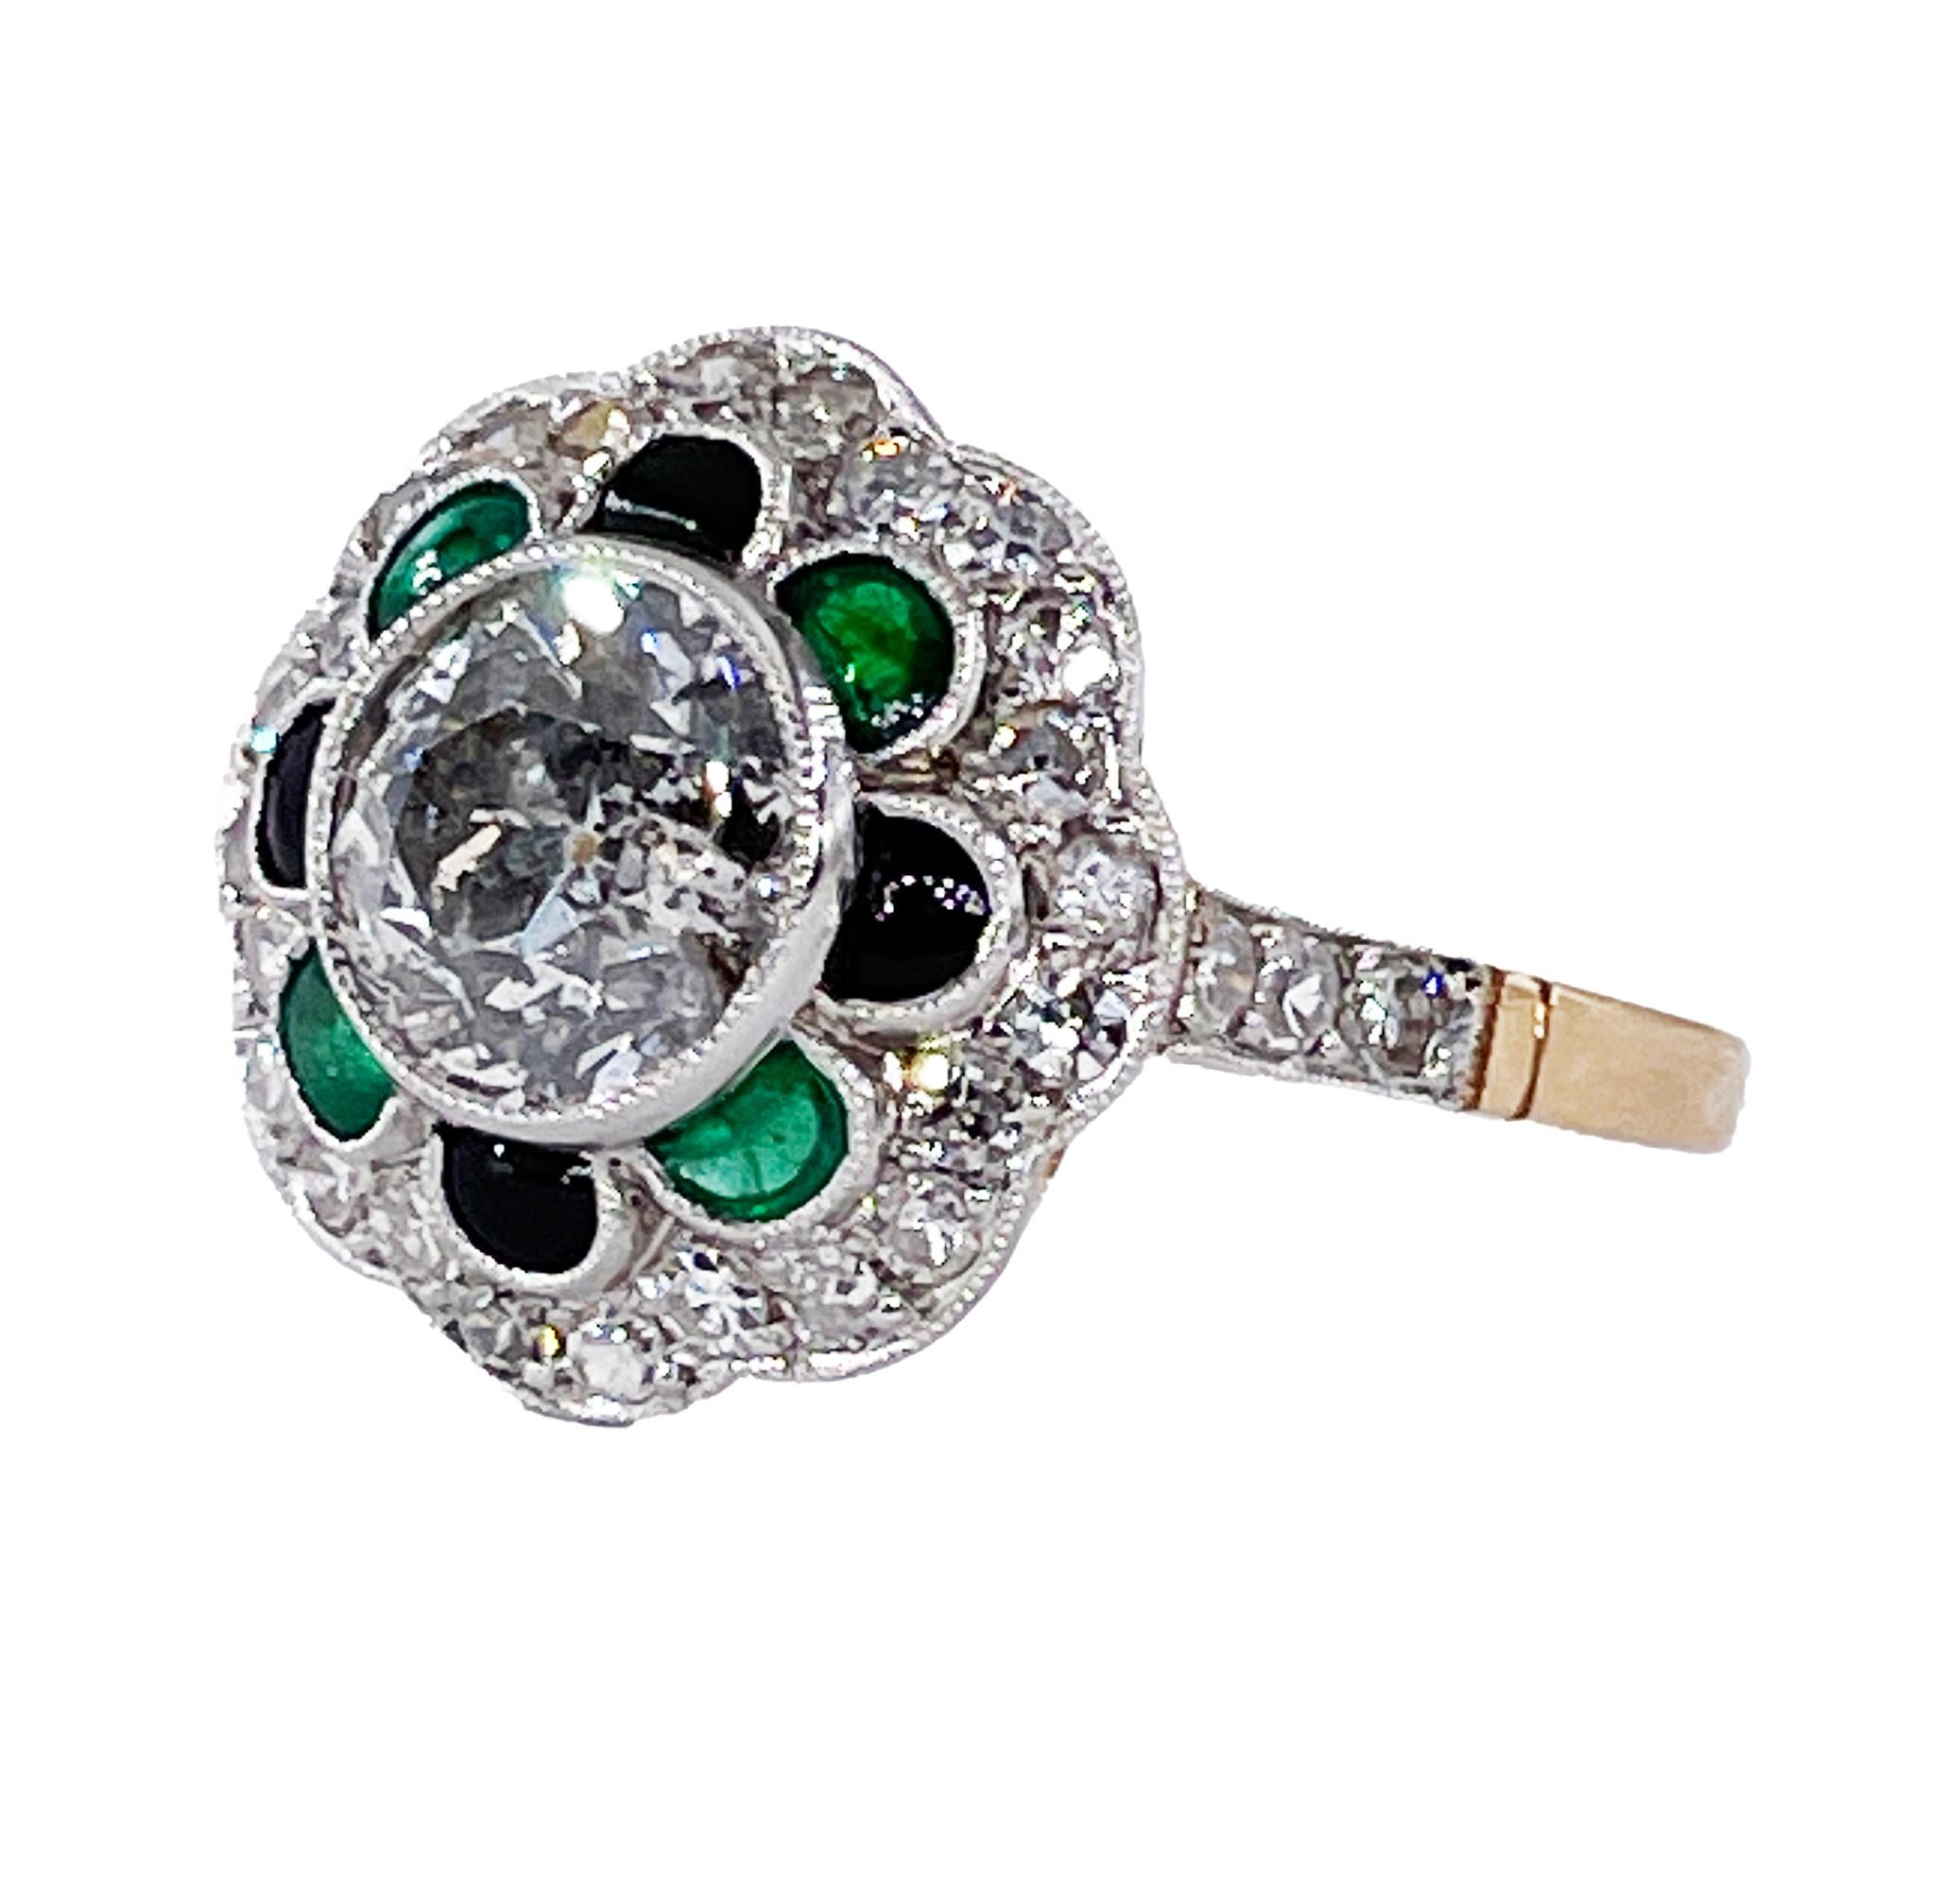 Antique 2.27ctw OLD EUROPEAN Diamond Emerald Black Onyx Cocktail Flower Cluster Platinum 18K Gold Ring, Circa 1915.

This breathtakingly beautiful, darling and delicate Flower shaped, Cluster Ring finely hand crafted in Platinum & 18K Yellow Gold (